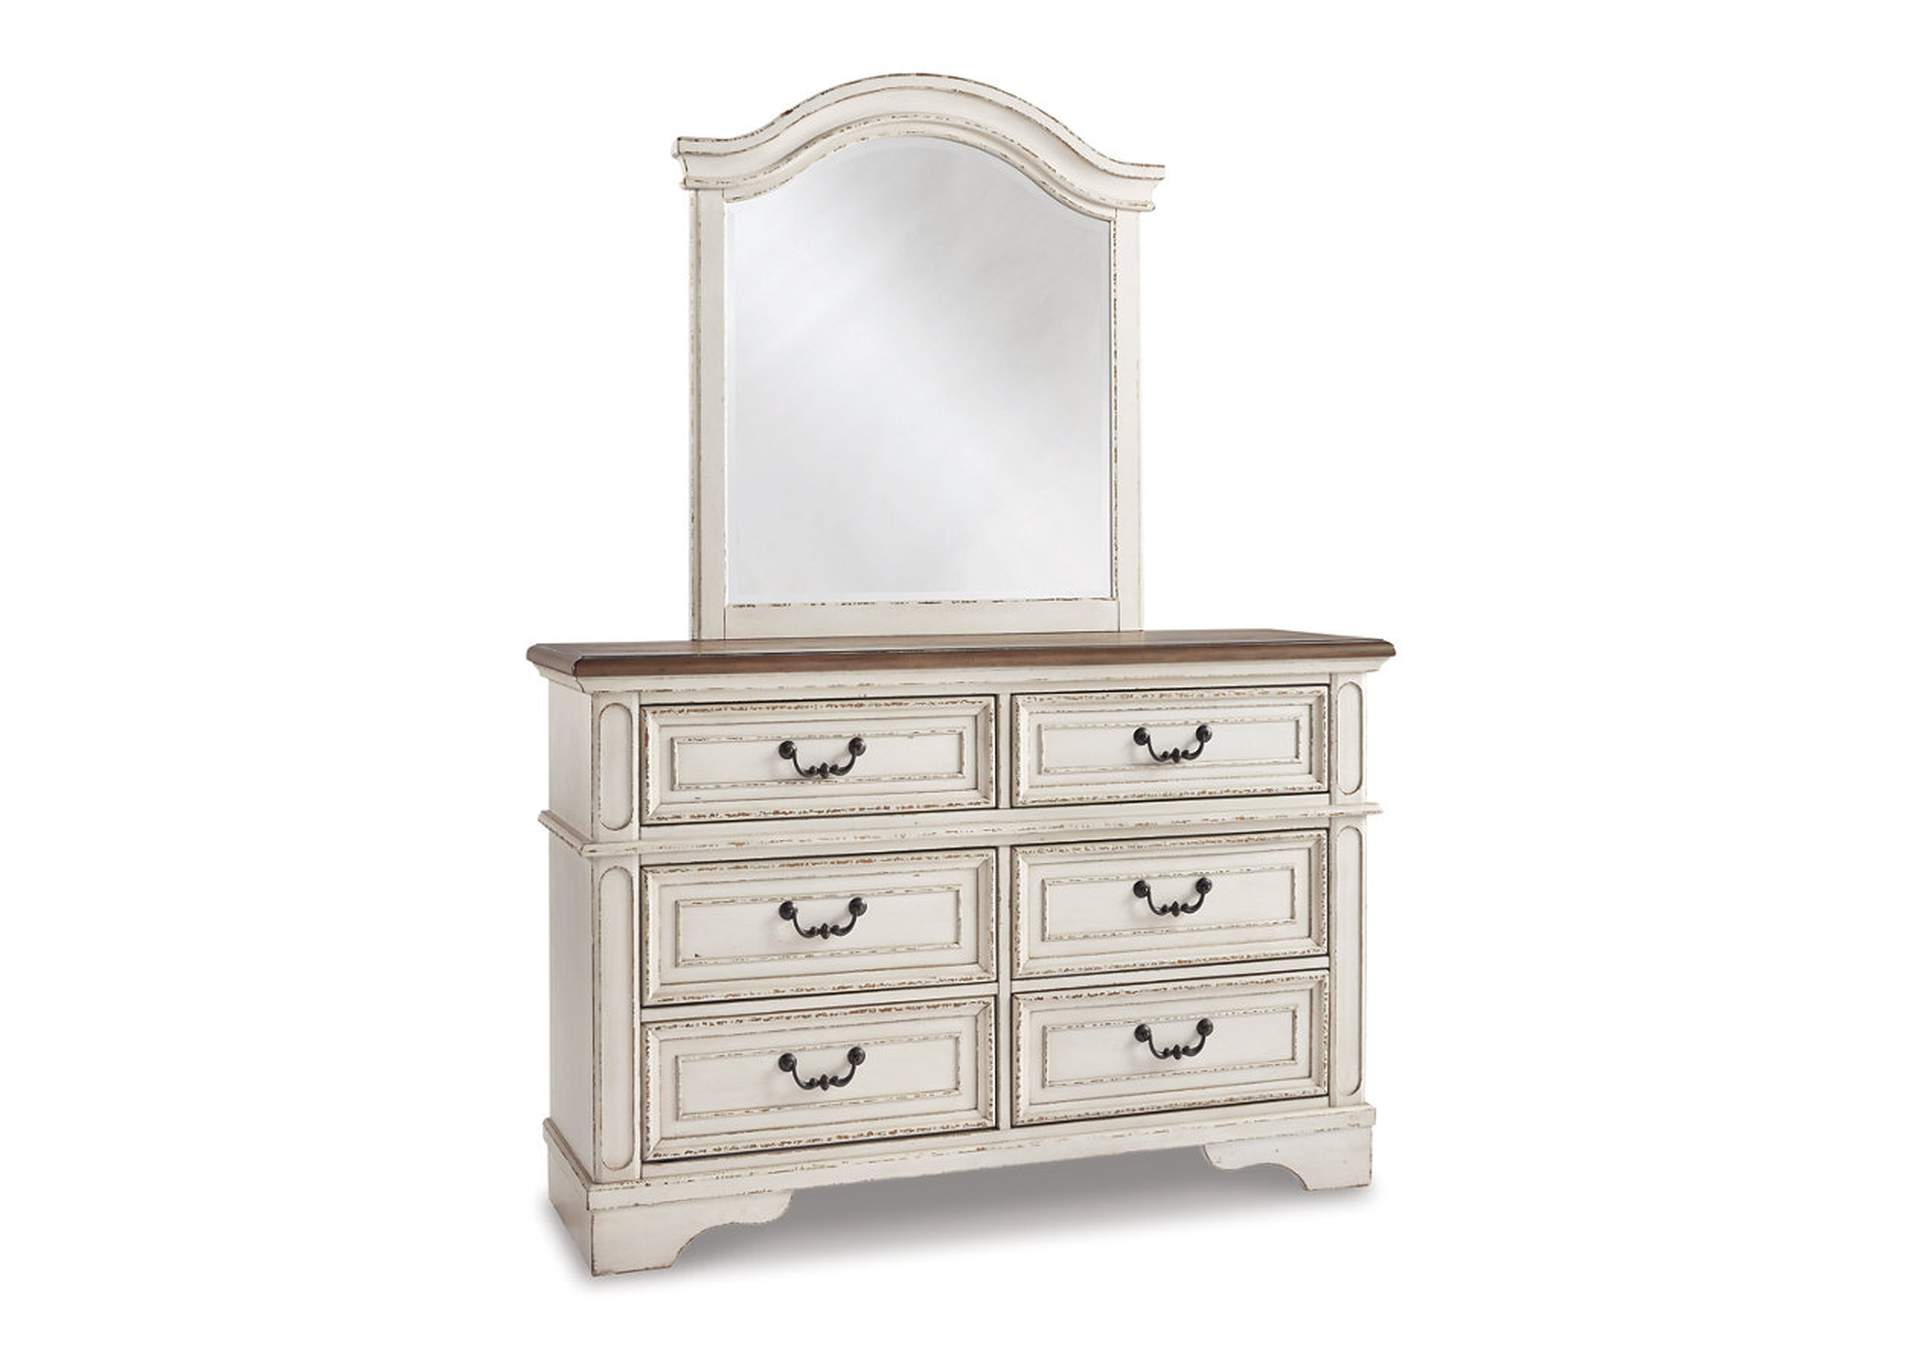 Realyn Full Panel Bed with Mirrored Dresser,Signature Design By Ashley